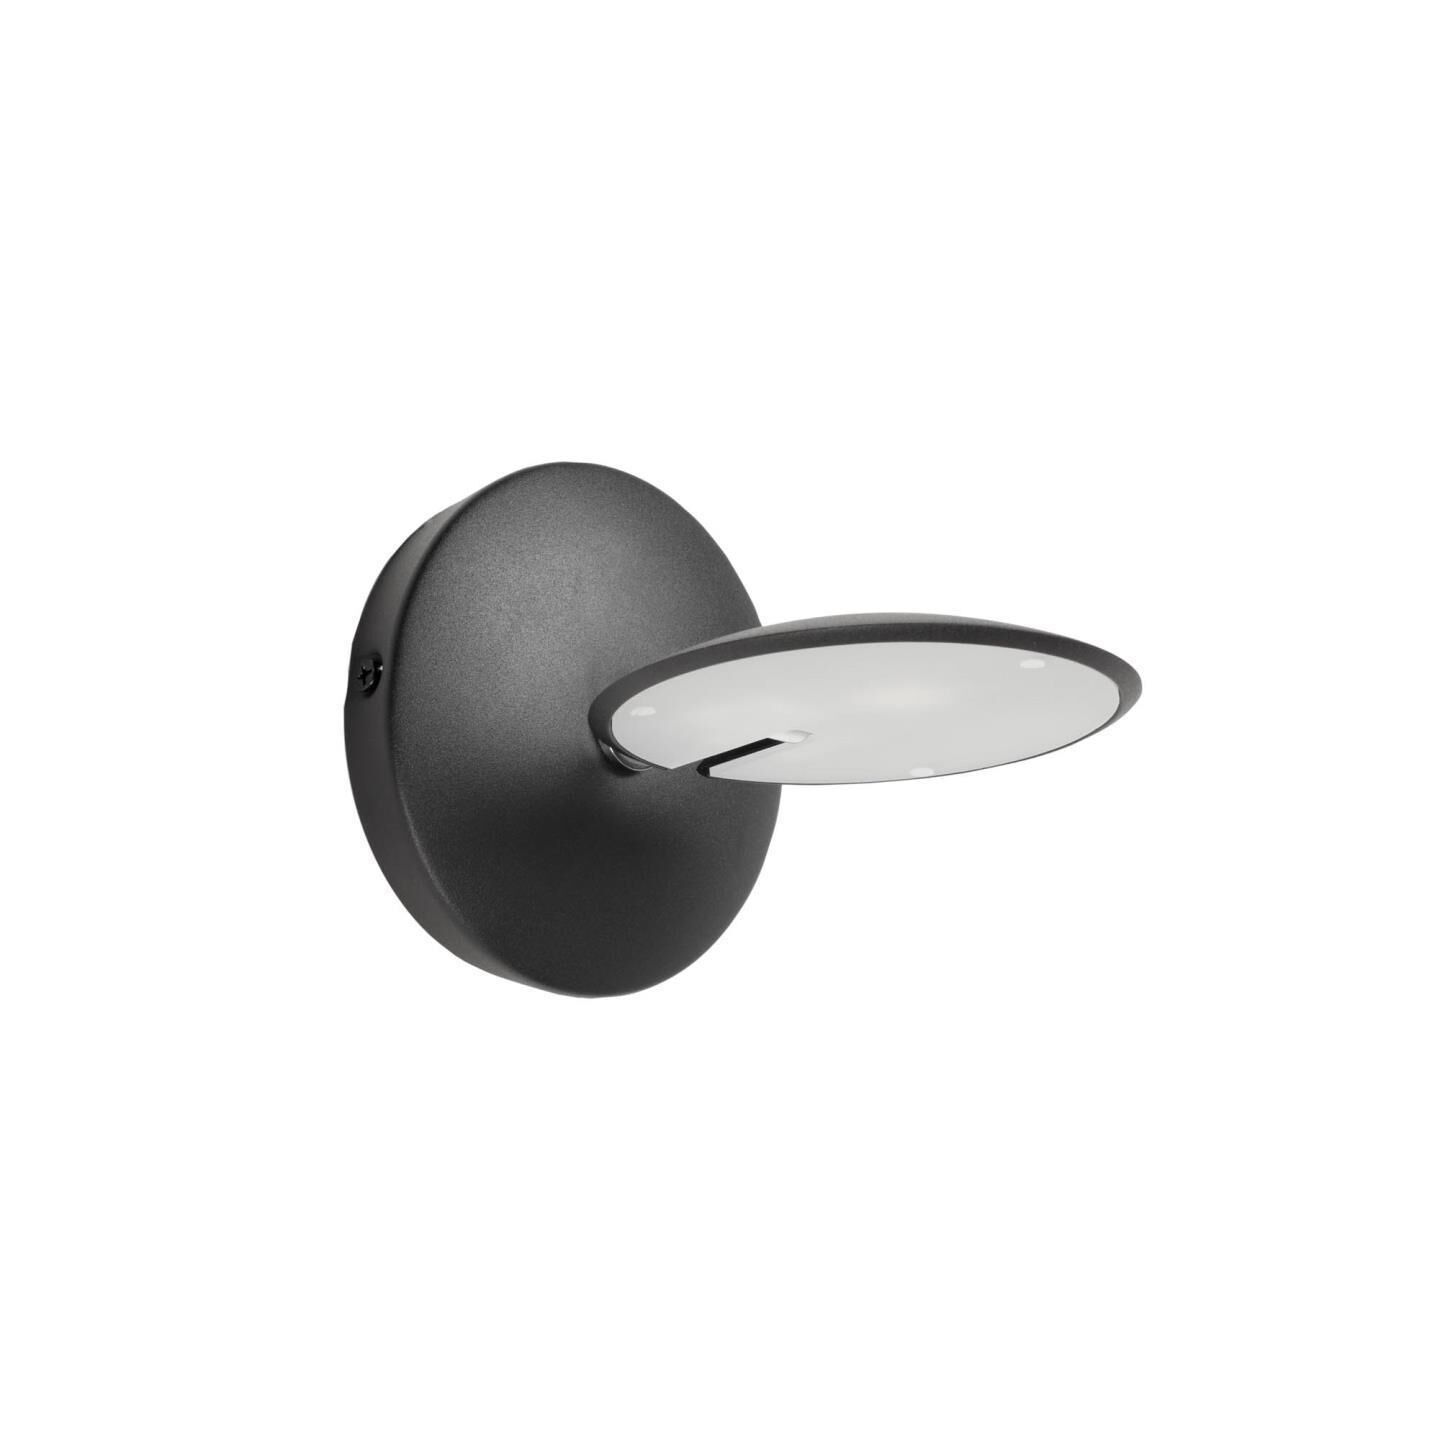 Kave Home Tannsy black wall lamp